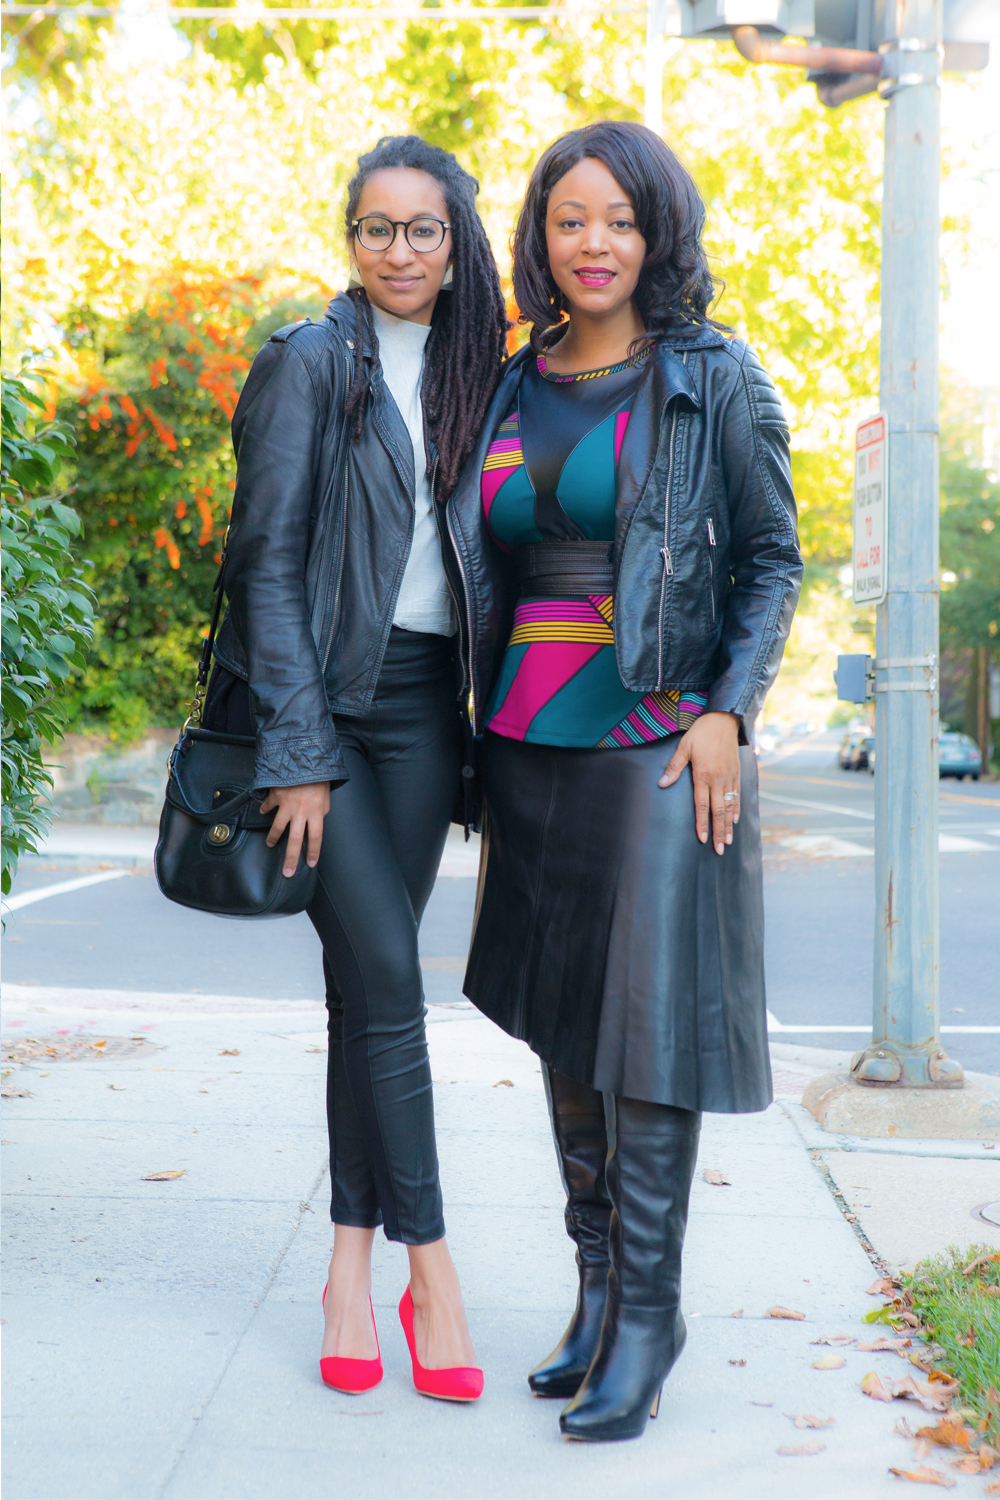 Sisterly Style: What we're wearing - H&M Biker Jacket, Worthington Cap-Sleeve Faux-Leather Peplum Blouse, Worthington Faux-Leather Asymmetrical Skirt, Audrey Brooke Tate Over-the-Knee Boots, Proenza Schouler PS11 Mini Classic, Wilson's Leather Motorcycle Jacket, Coach Crossbody Bag, Sleeveless Mock Neck Top, Banana Republic Sloan Fit Faux Leather Front Skinny Ankle Pant, Express Pointed Toe D'orsay Pump in Red